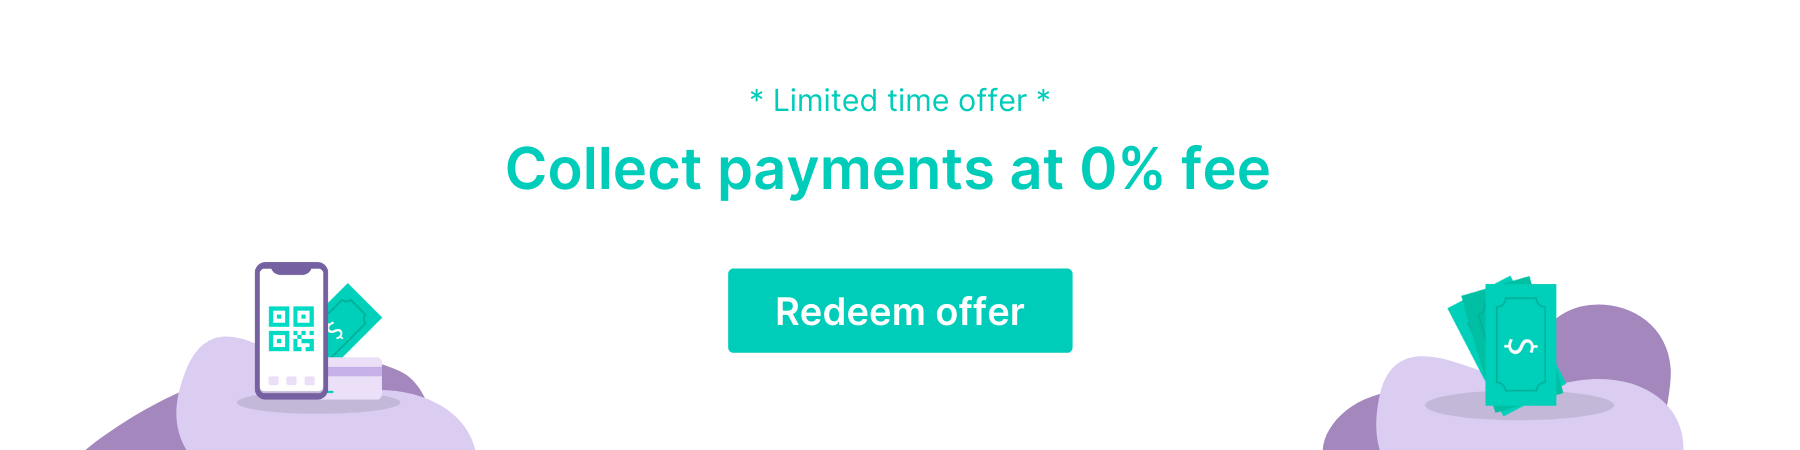 Website banner: For a limited time only, collect payments at 0% fee. View offer >